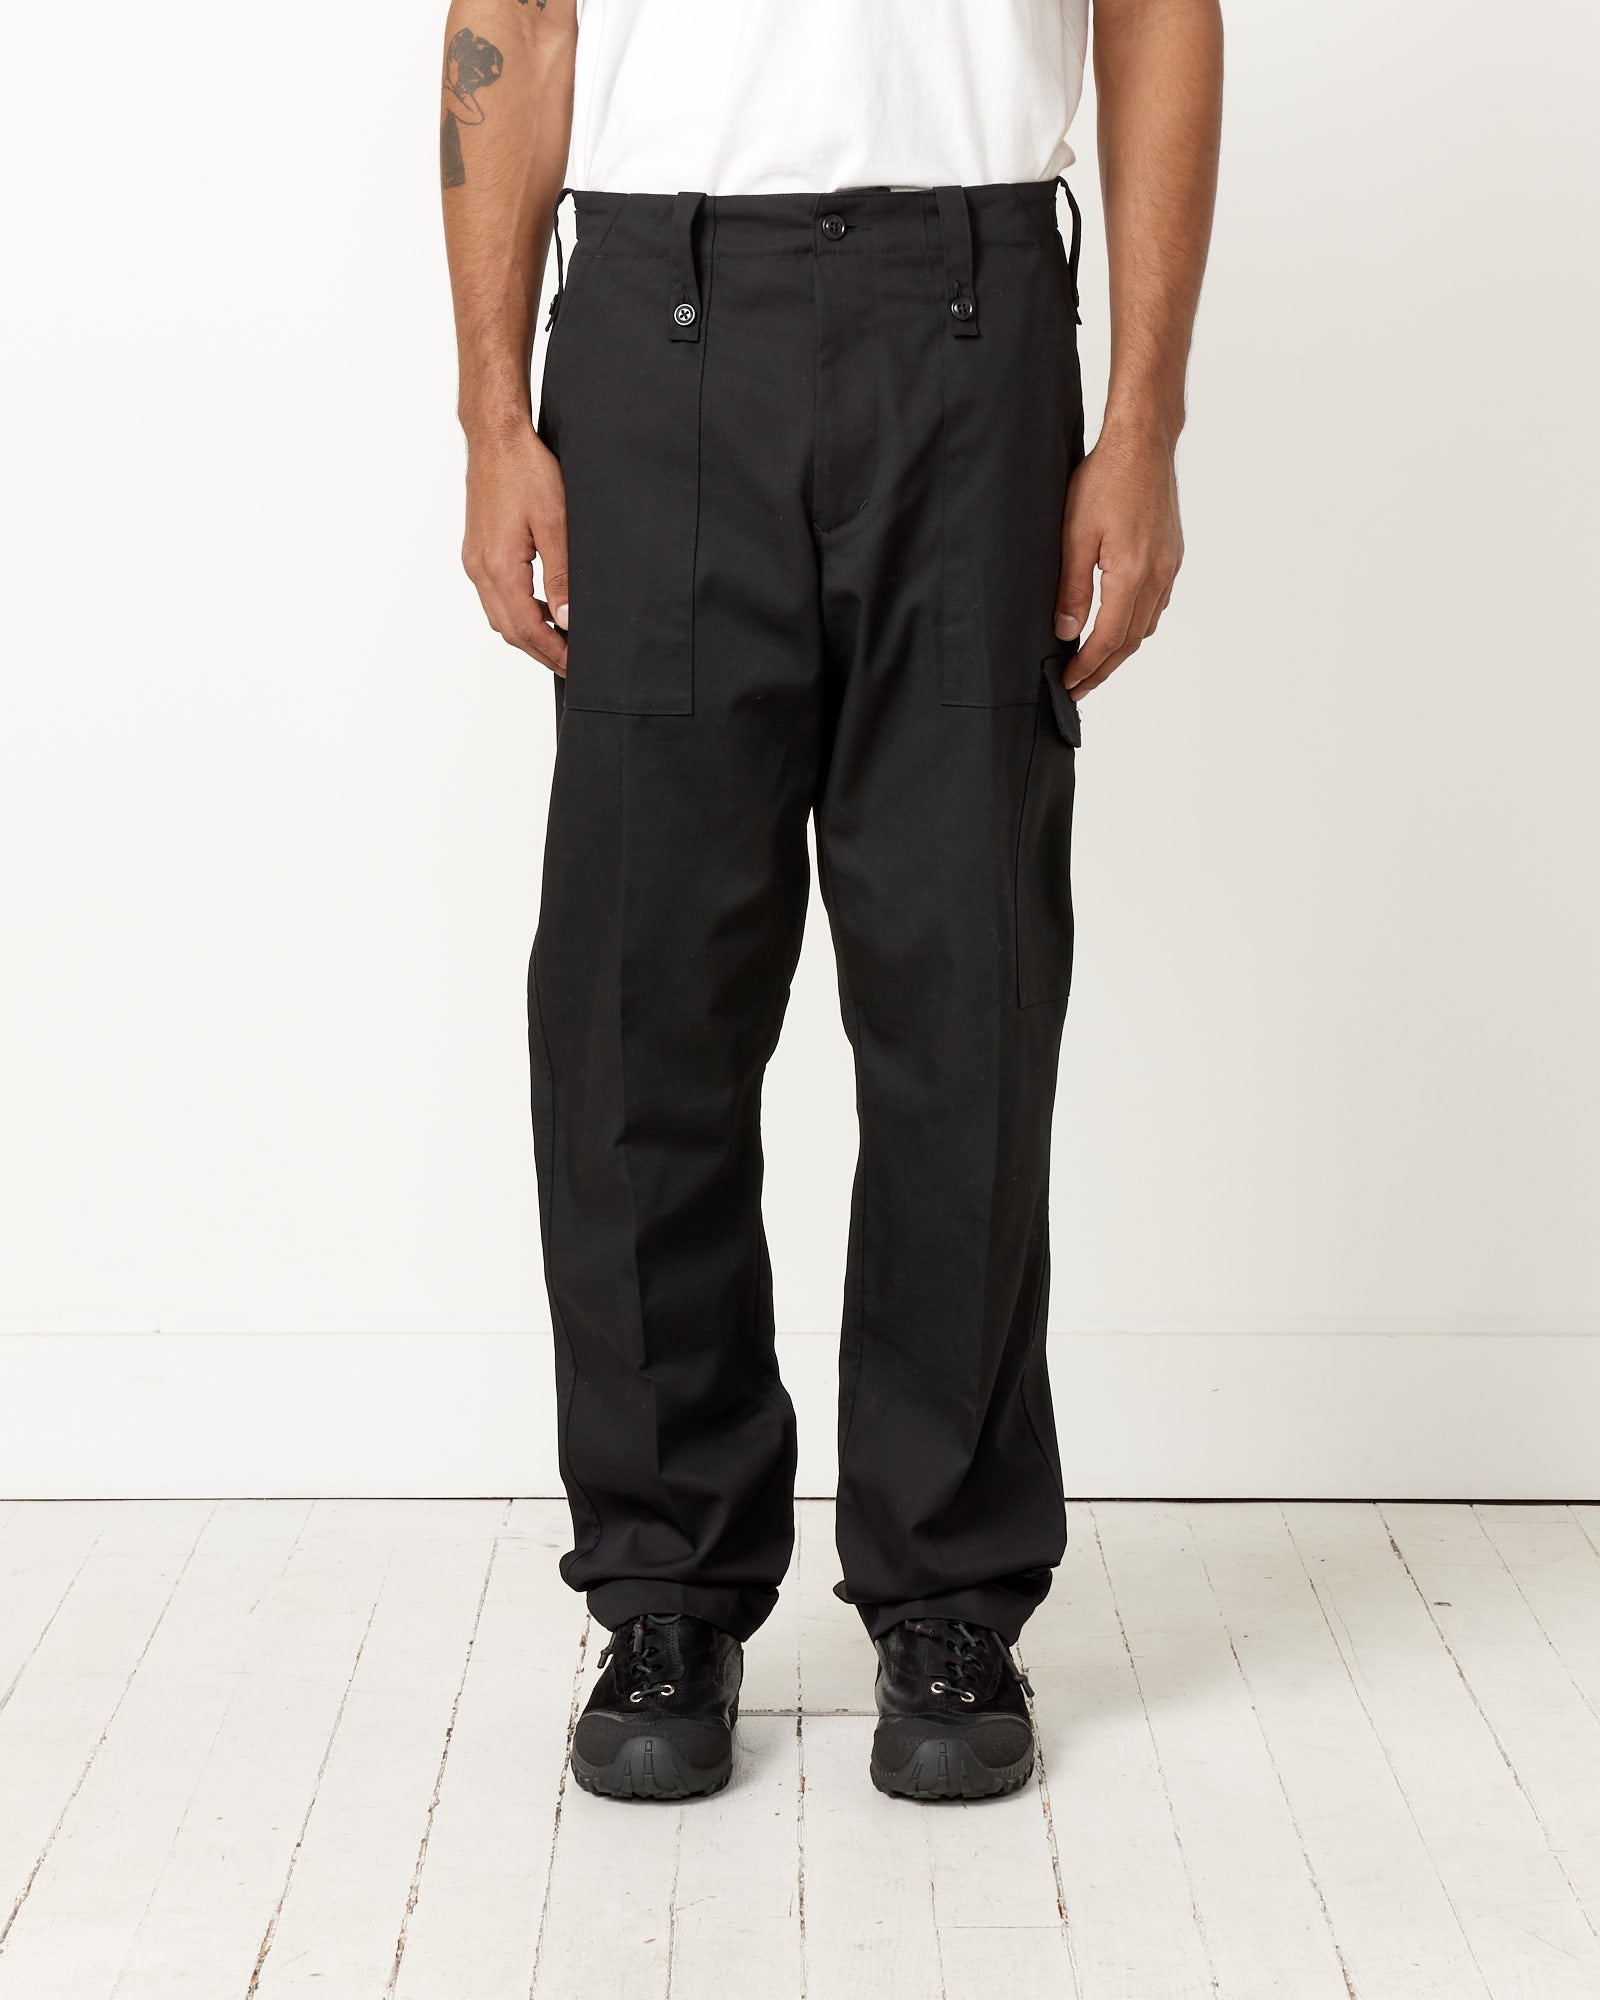 OCR Pant ECO Twill in Black – Mohawk General Store